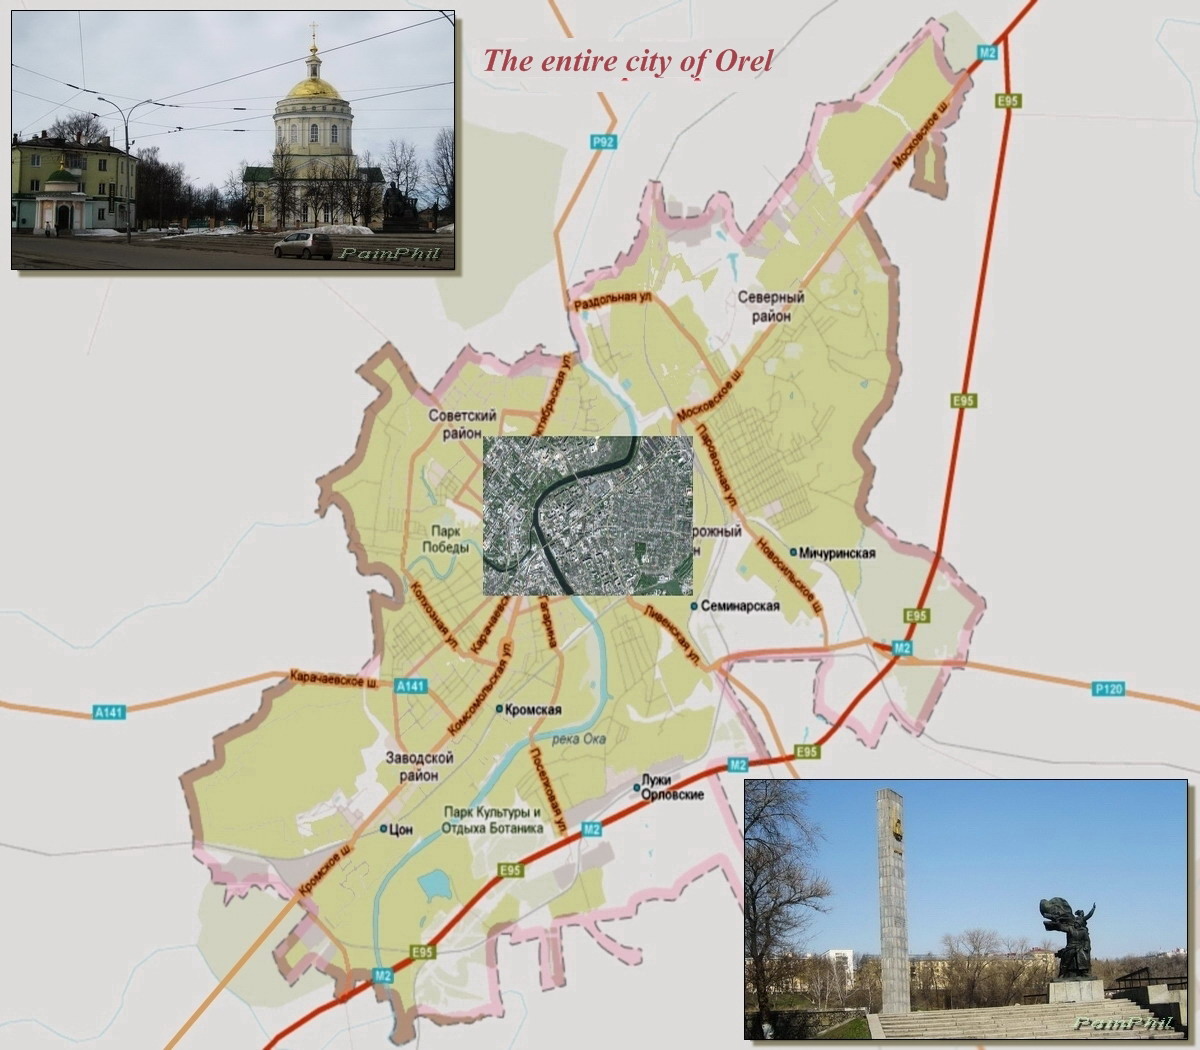 Map of Modern of Orel with a dedicated center of the city